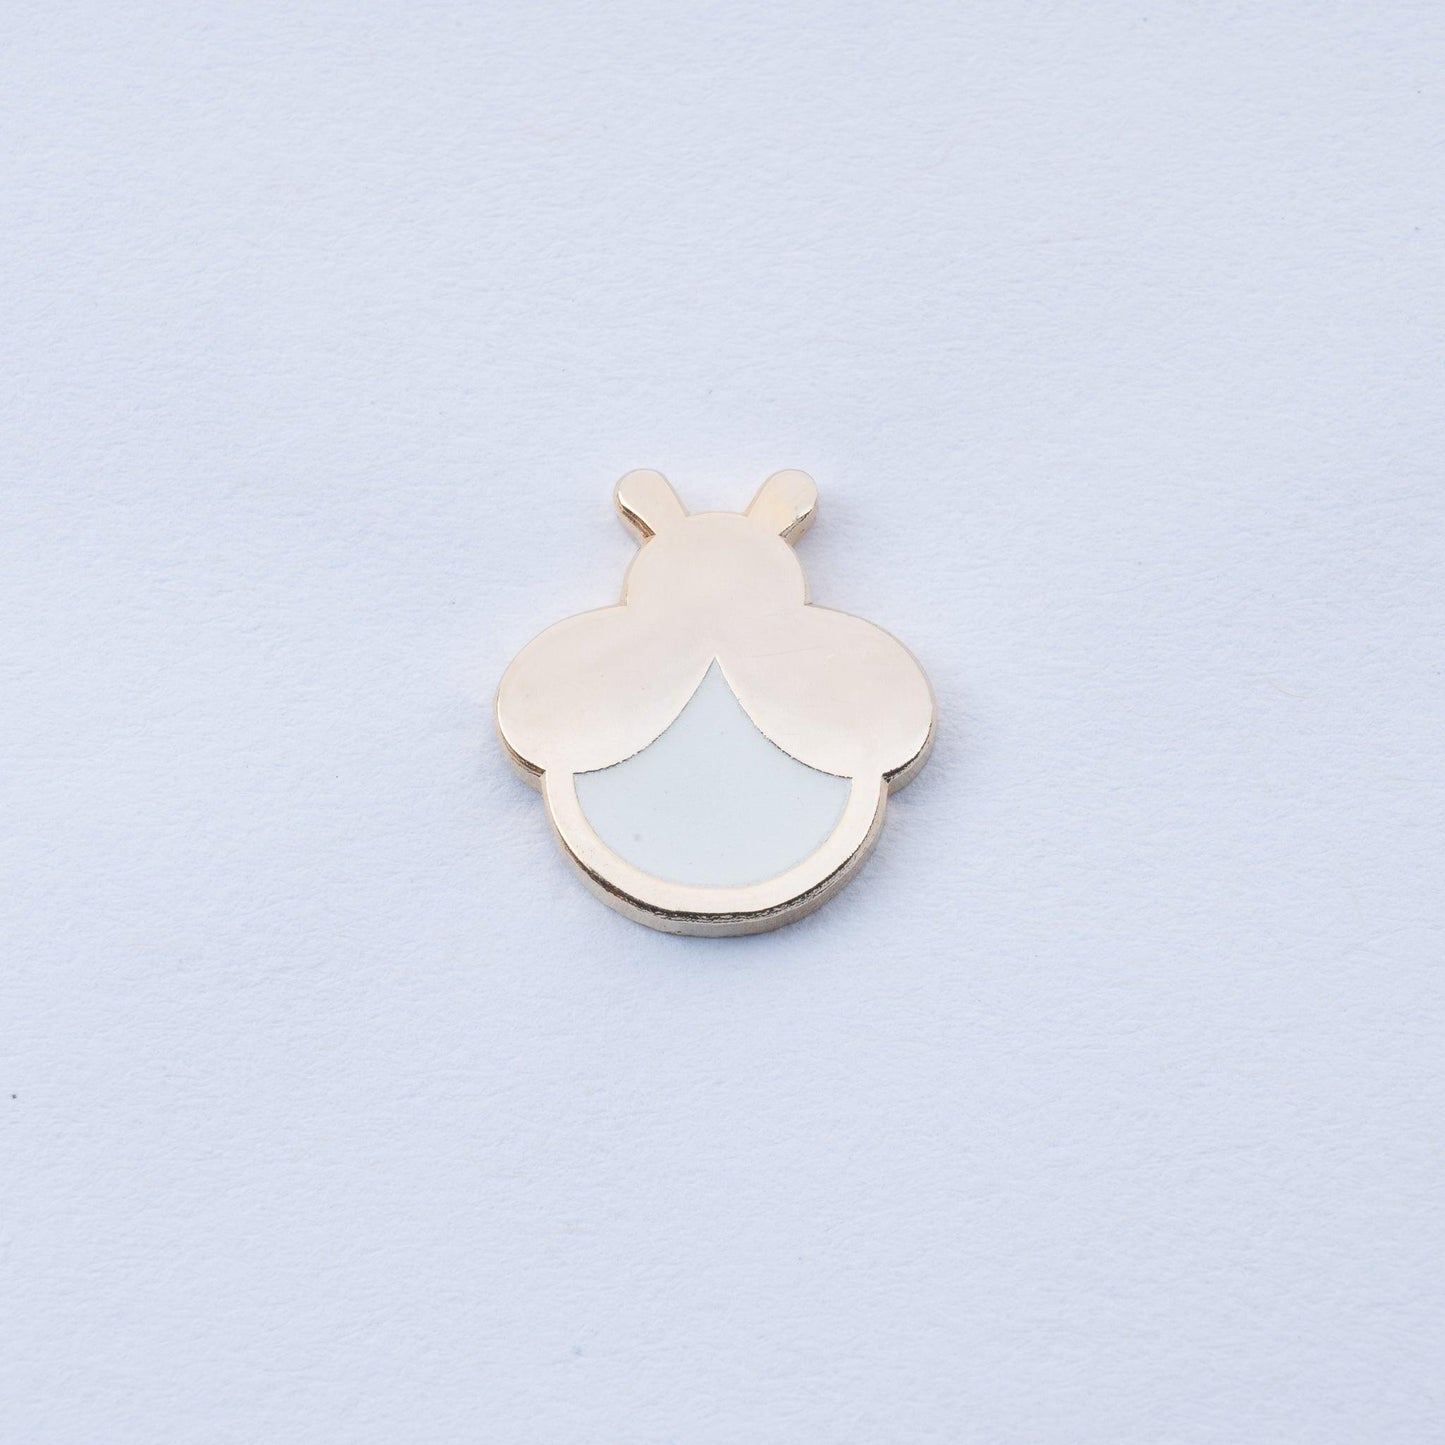 gold plated firefly enamel pin with white body that glows in the dark